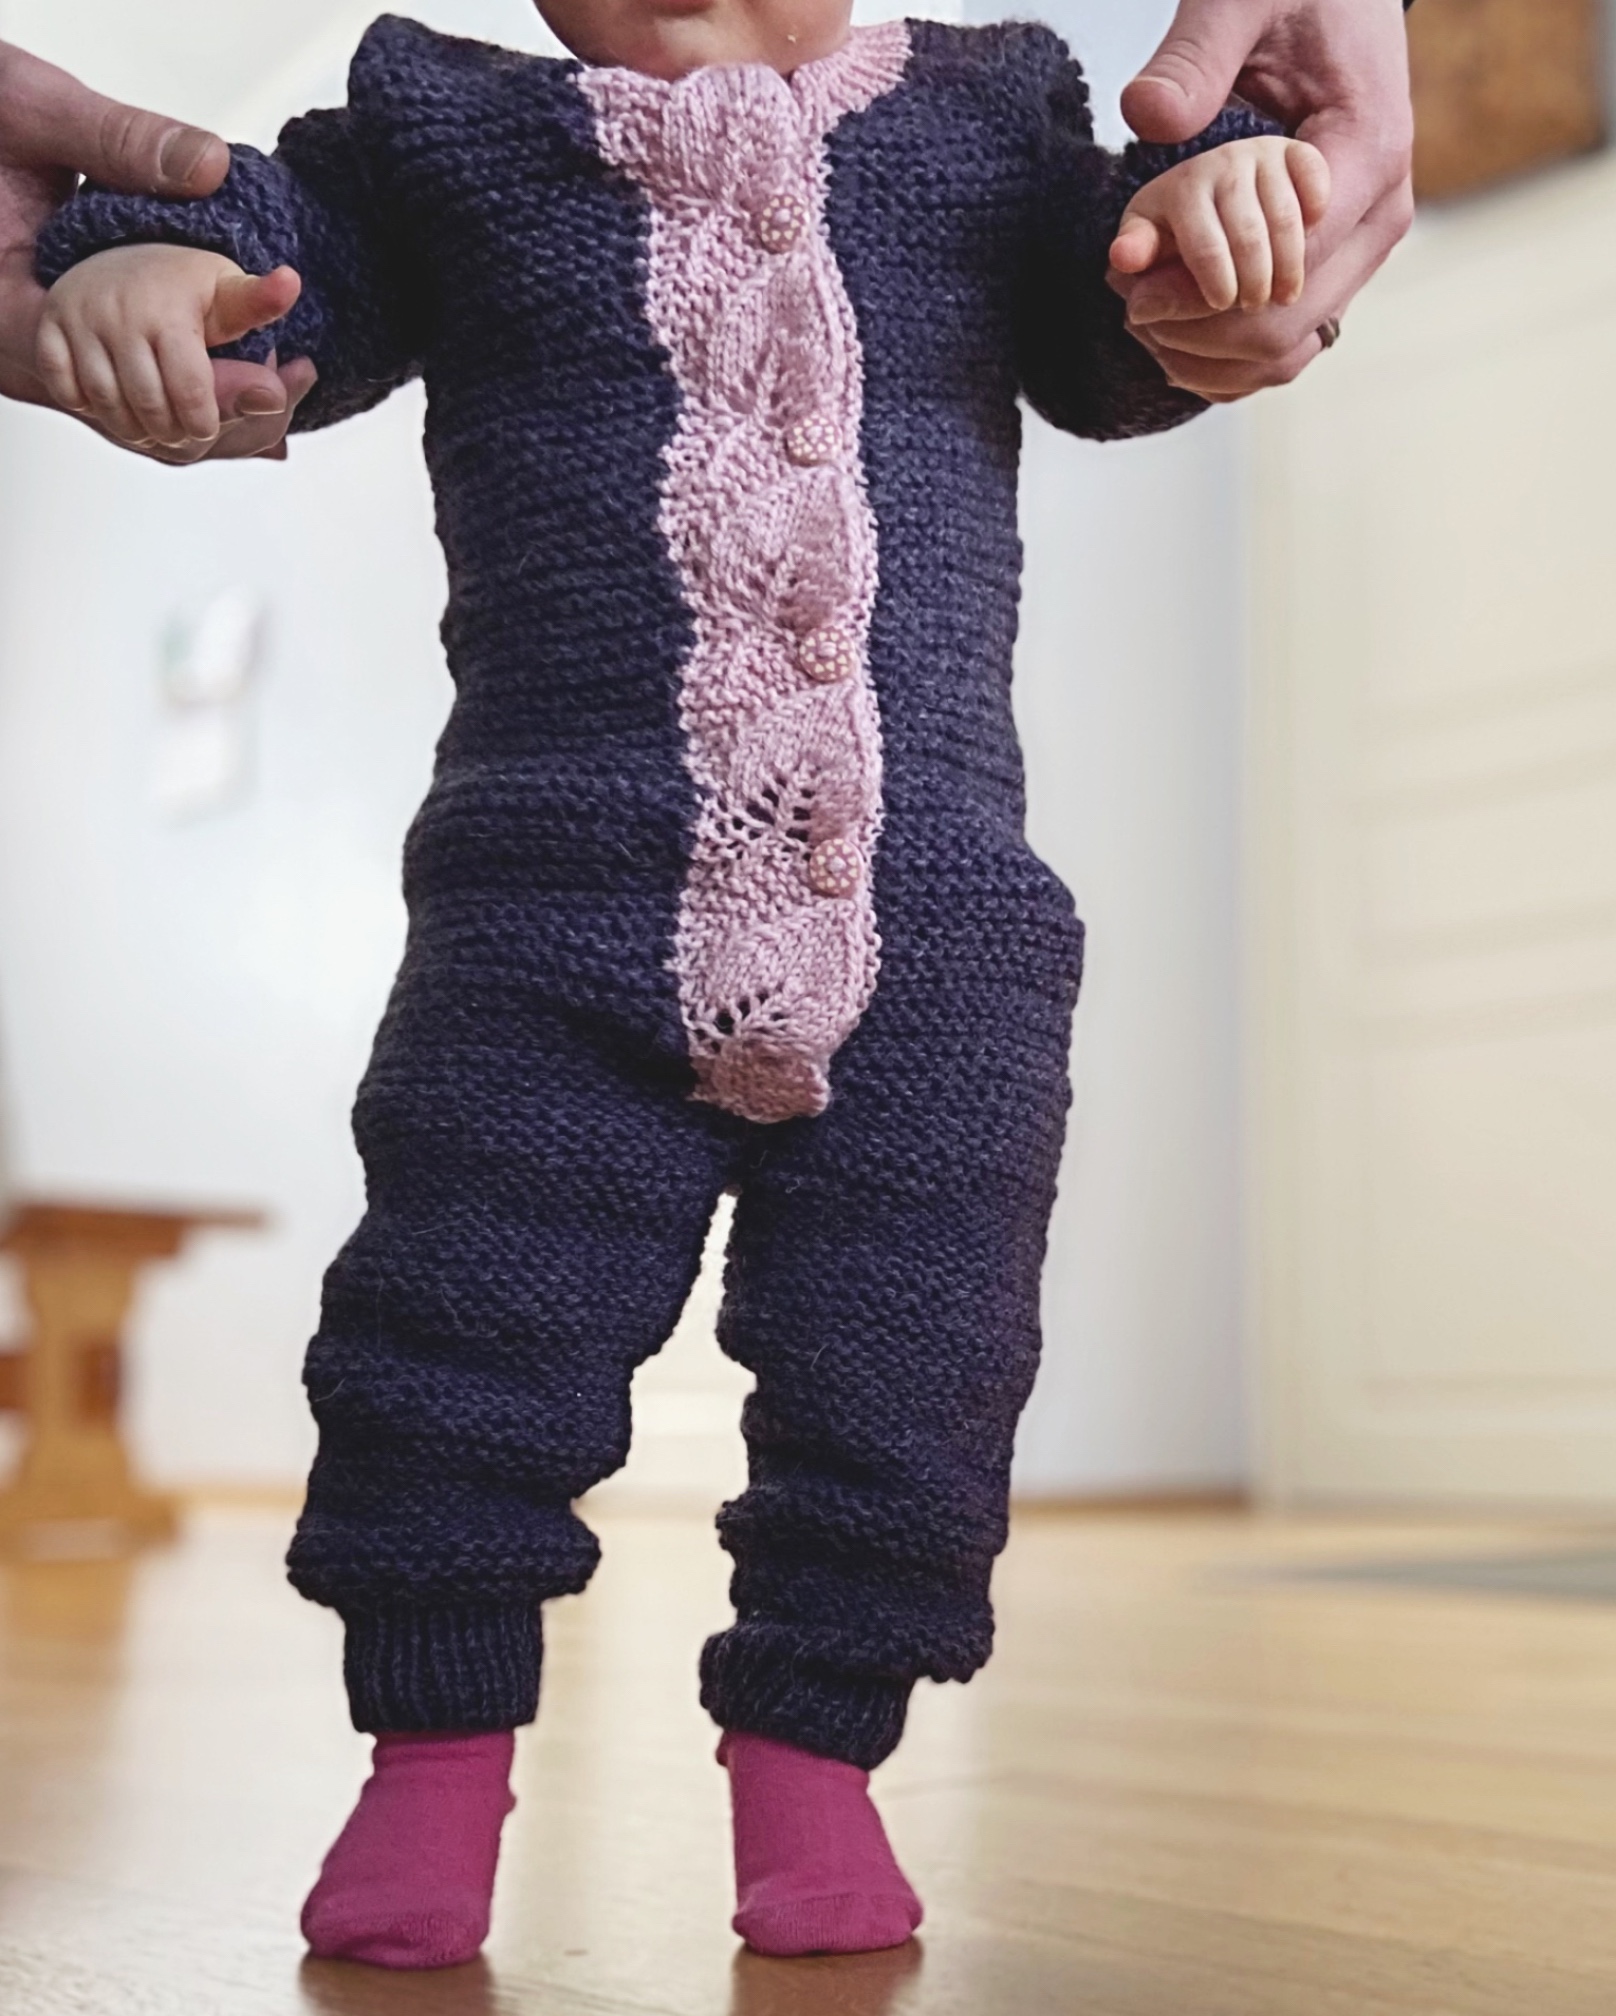 Baby overall knitted with garter stitch. Button band is made of knitted leaves.